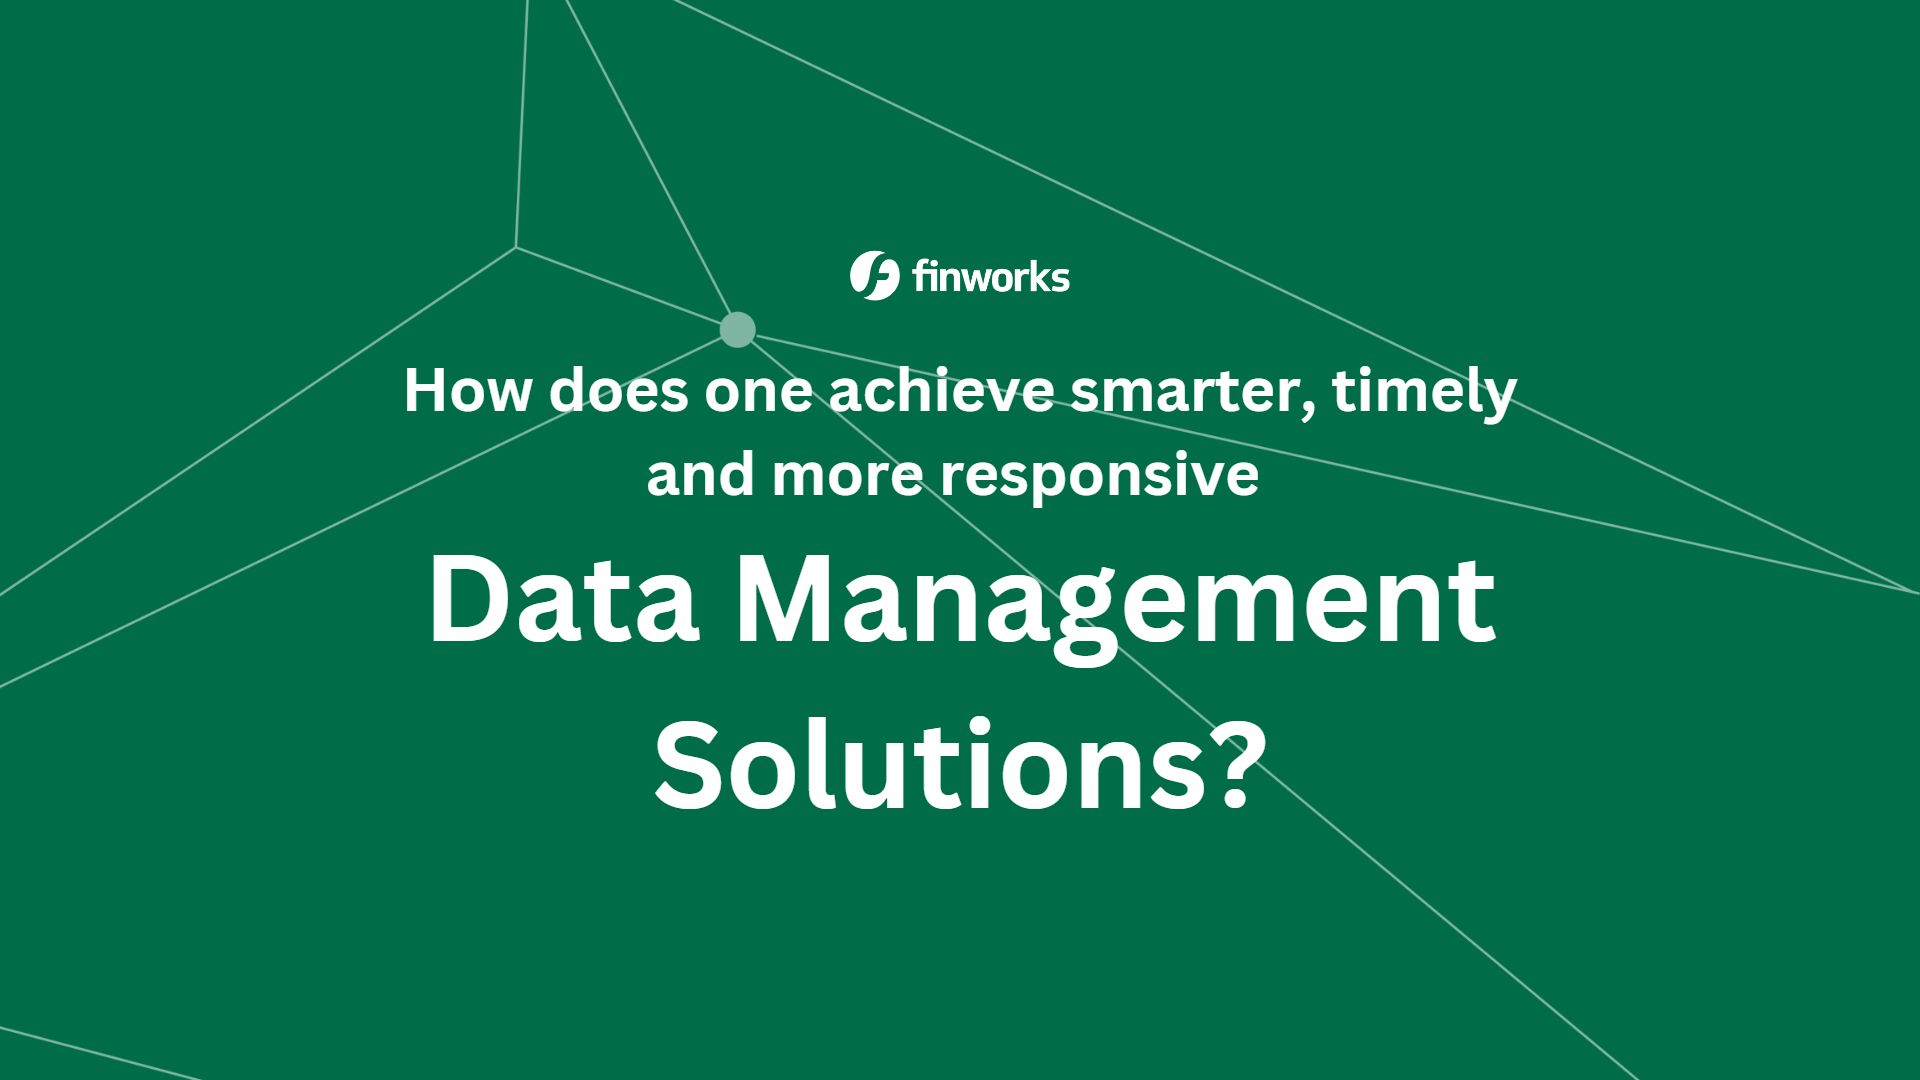 How does one achieve smarter, timely and more responsive data management solutions